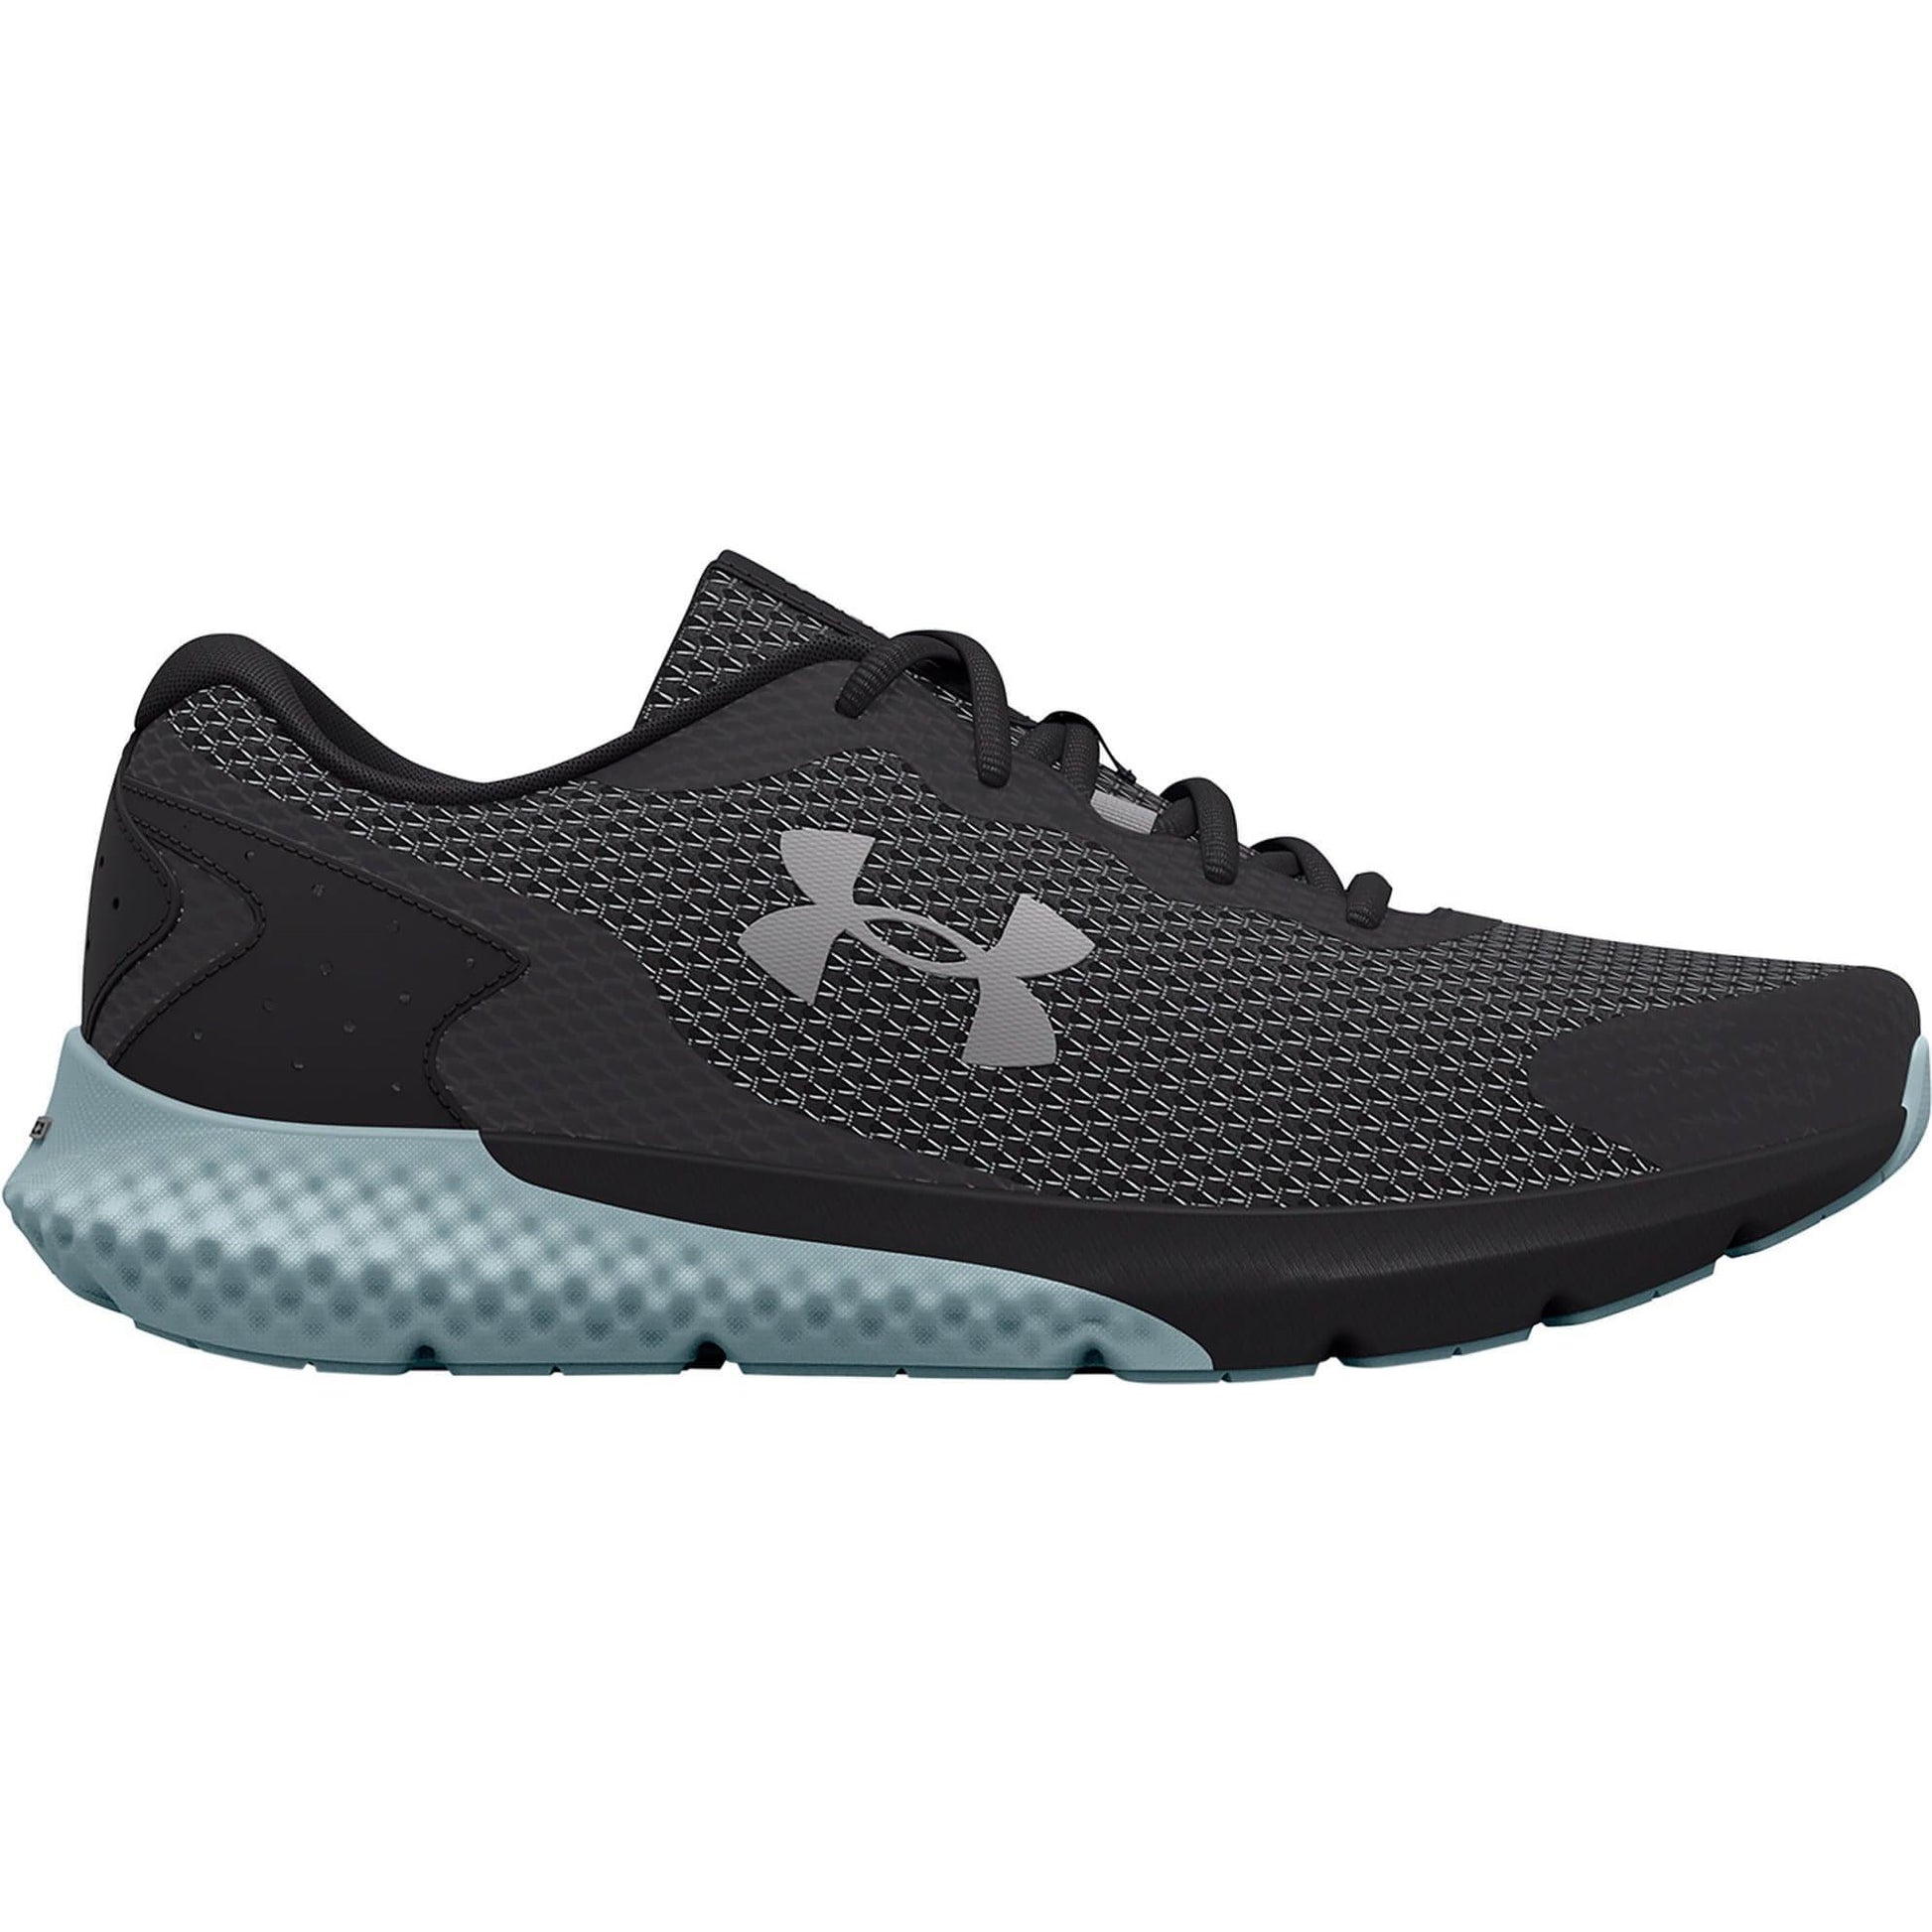 Under Armour Charged Rogue 3 Womens Running Shoes - Grey